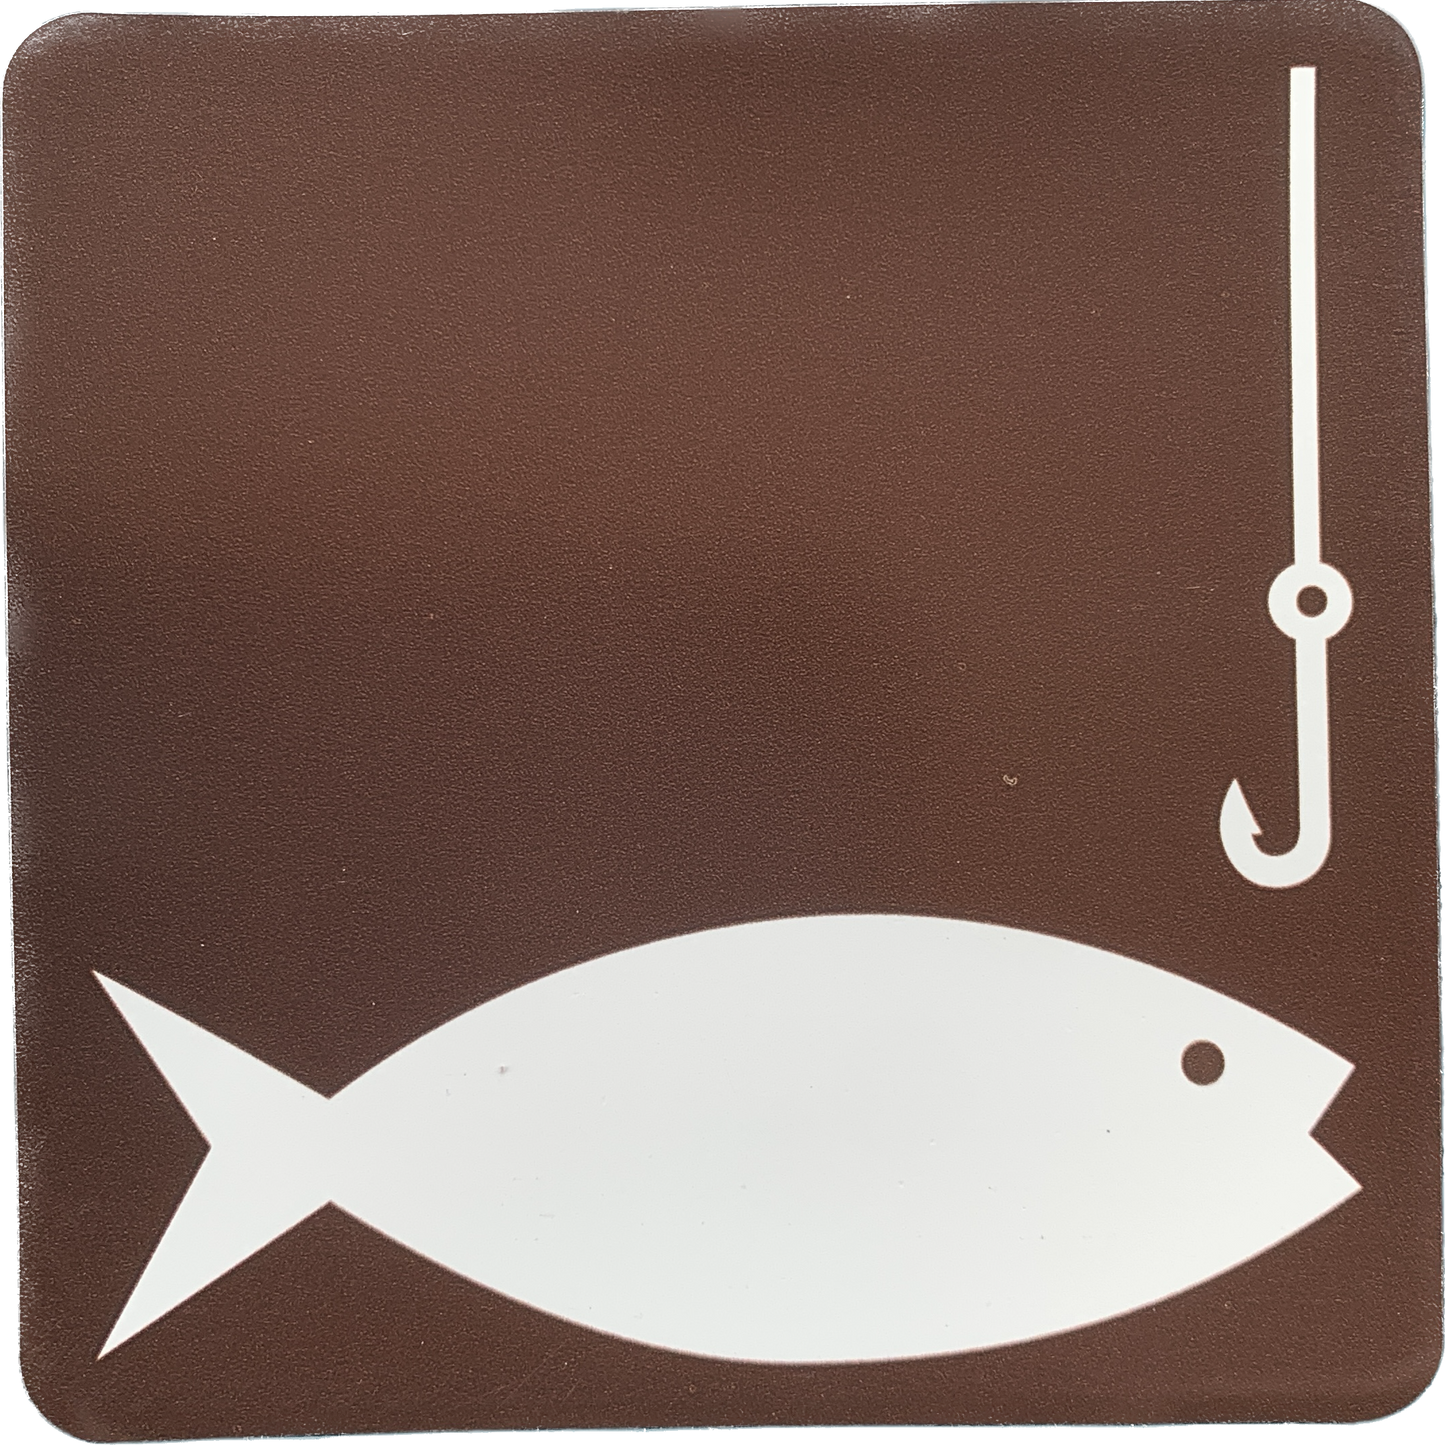 Fishing Allowed Magnet